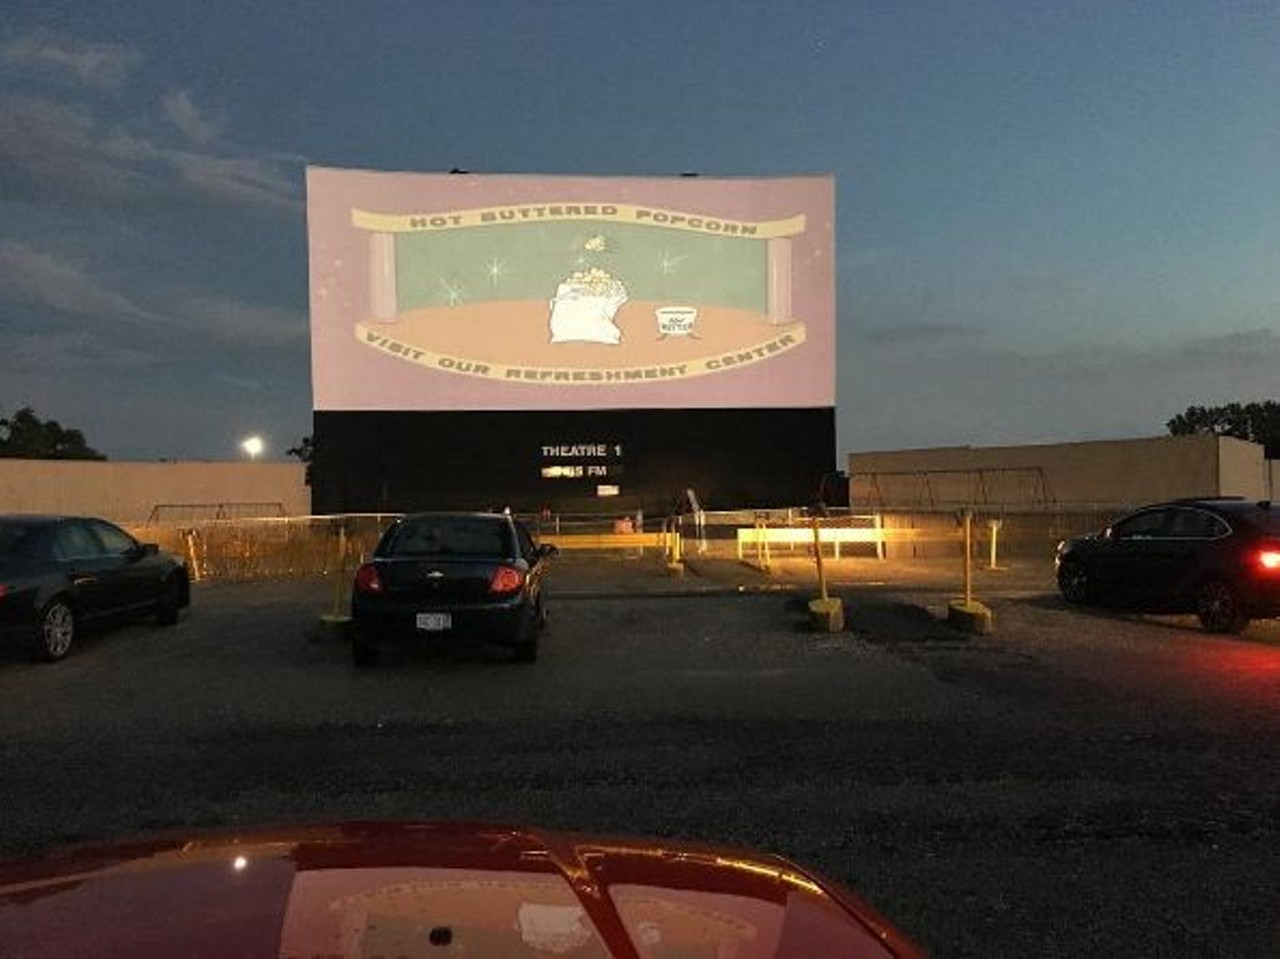 Watch a movie at the Drive-In
Watching movies stoned is a stoner&#146;s favorite pass time, so why not do it at the Drive-In? Just make sure you have a DD.&nbsp;Photo via Facebook.